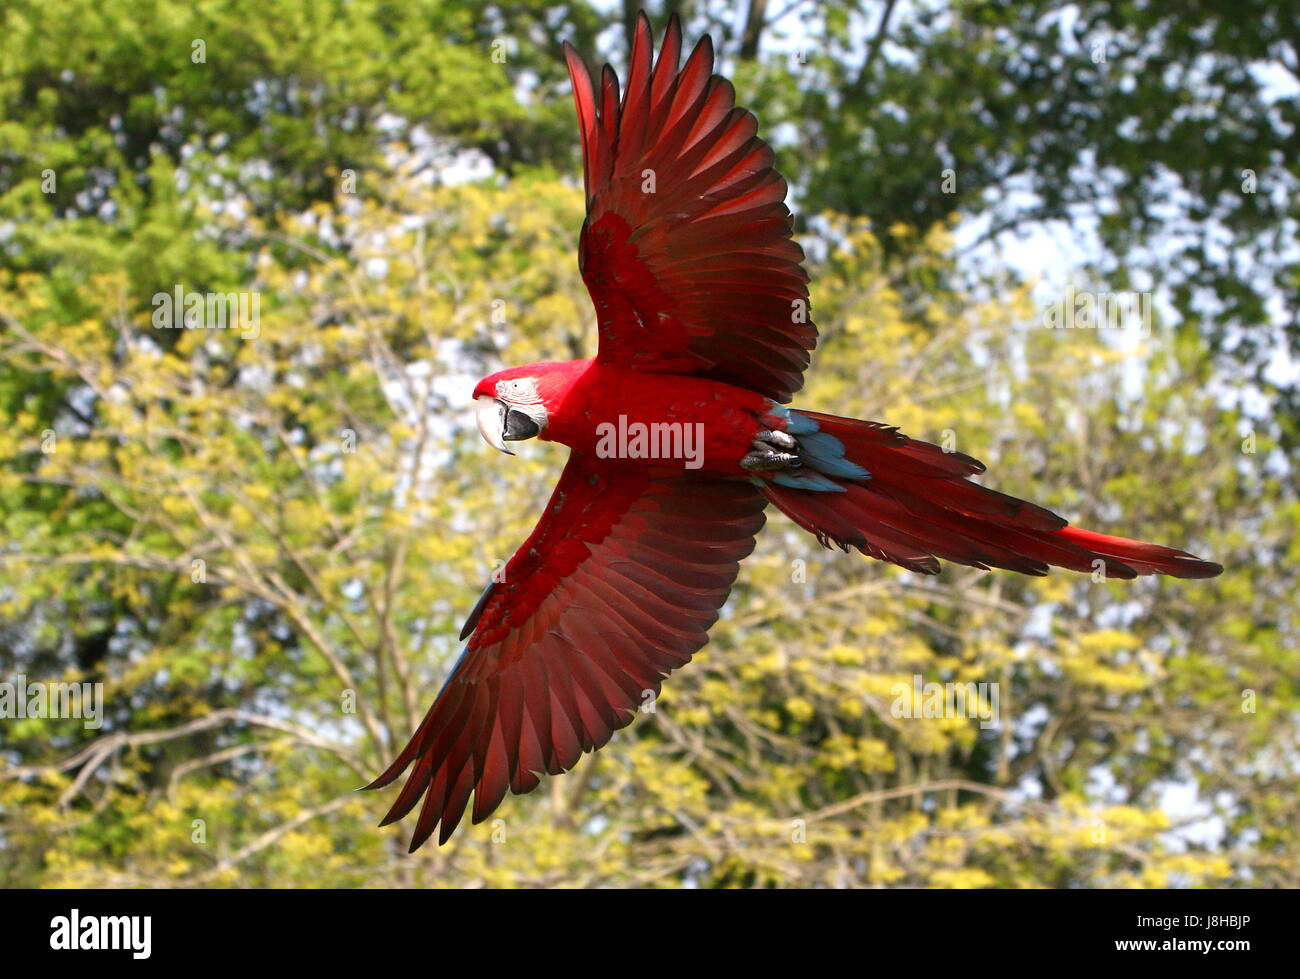 South American Red and green Macaw (Ara chloropterus) a.k.a. Green-winged Macaw in close flight Stock Photo